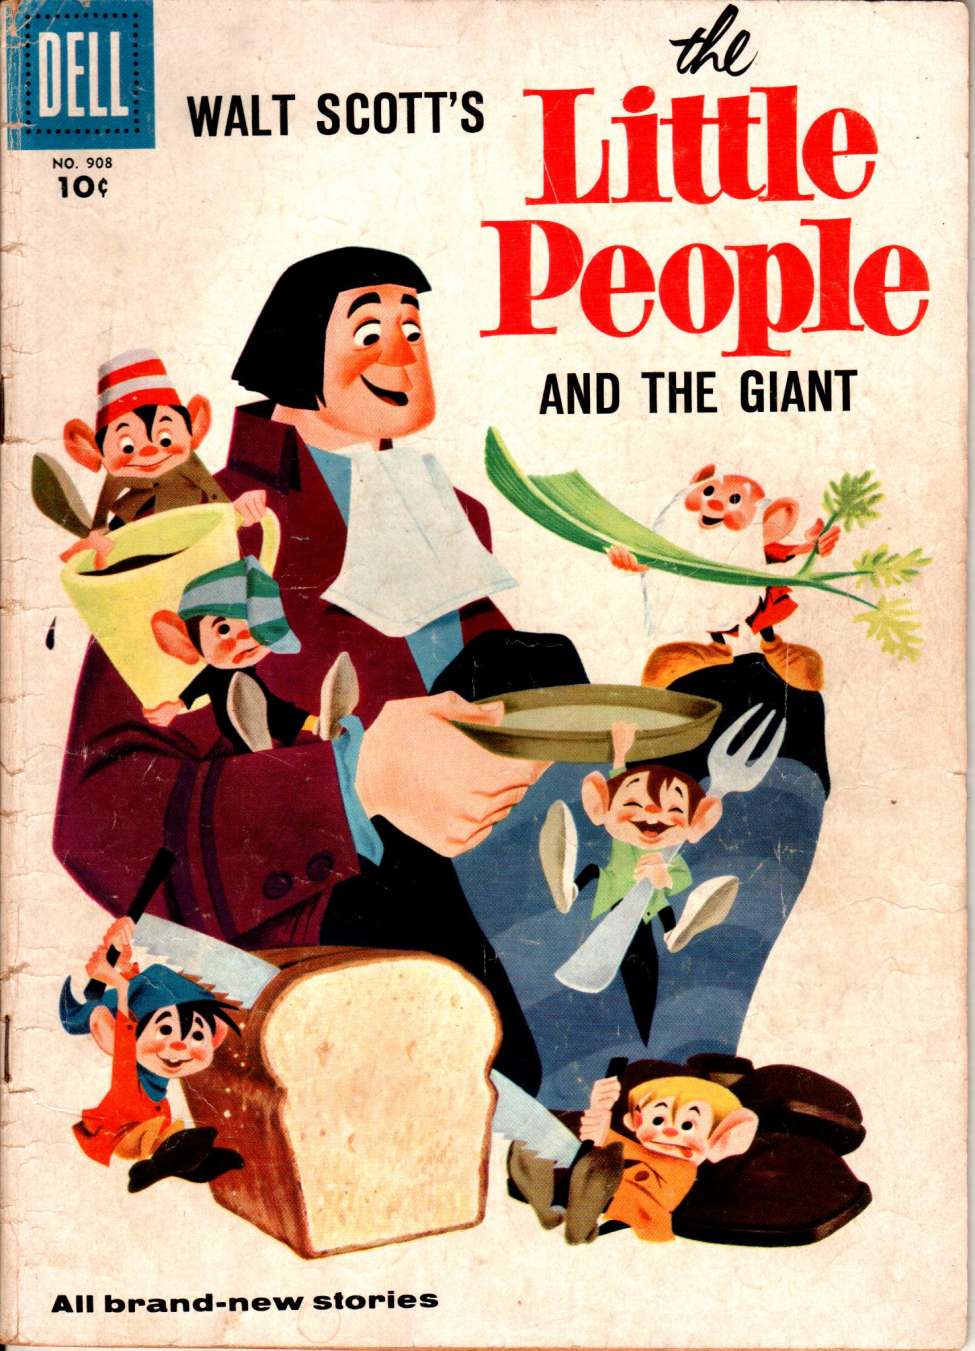 Book Cover For 0908 - Walt Scott's The Little People and the Giant